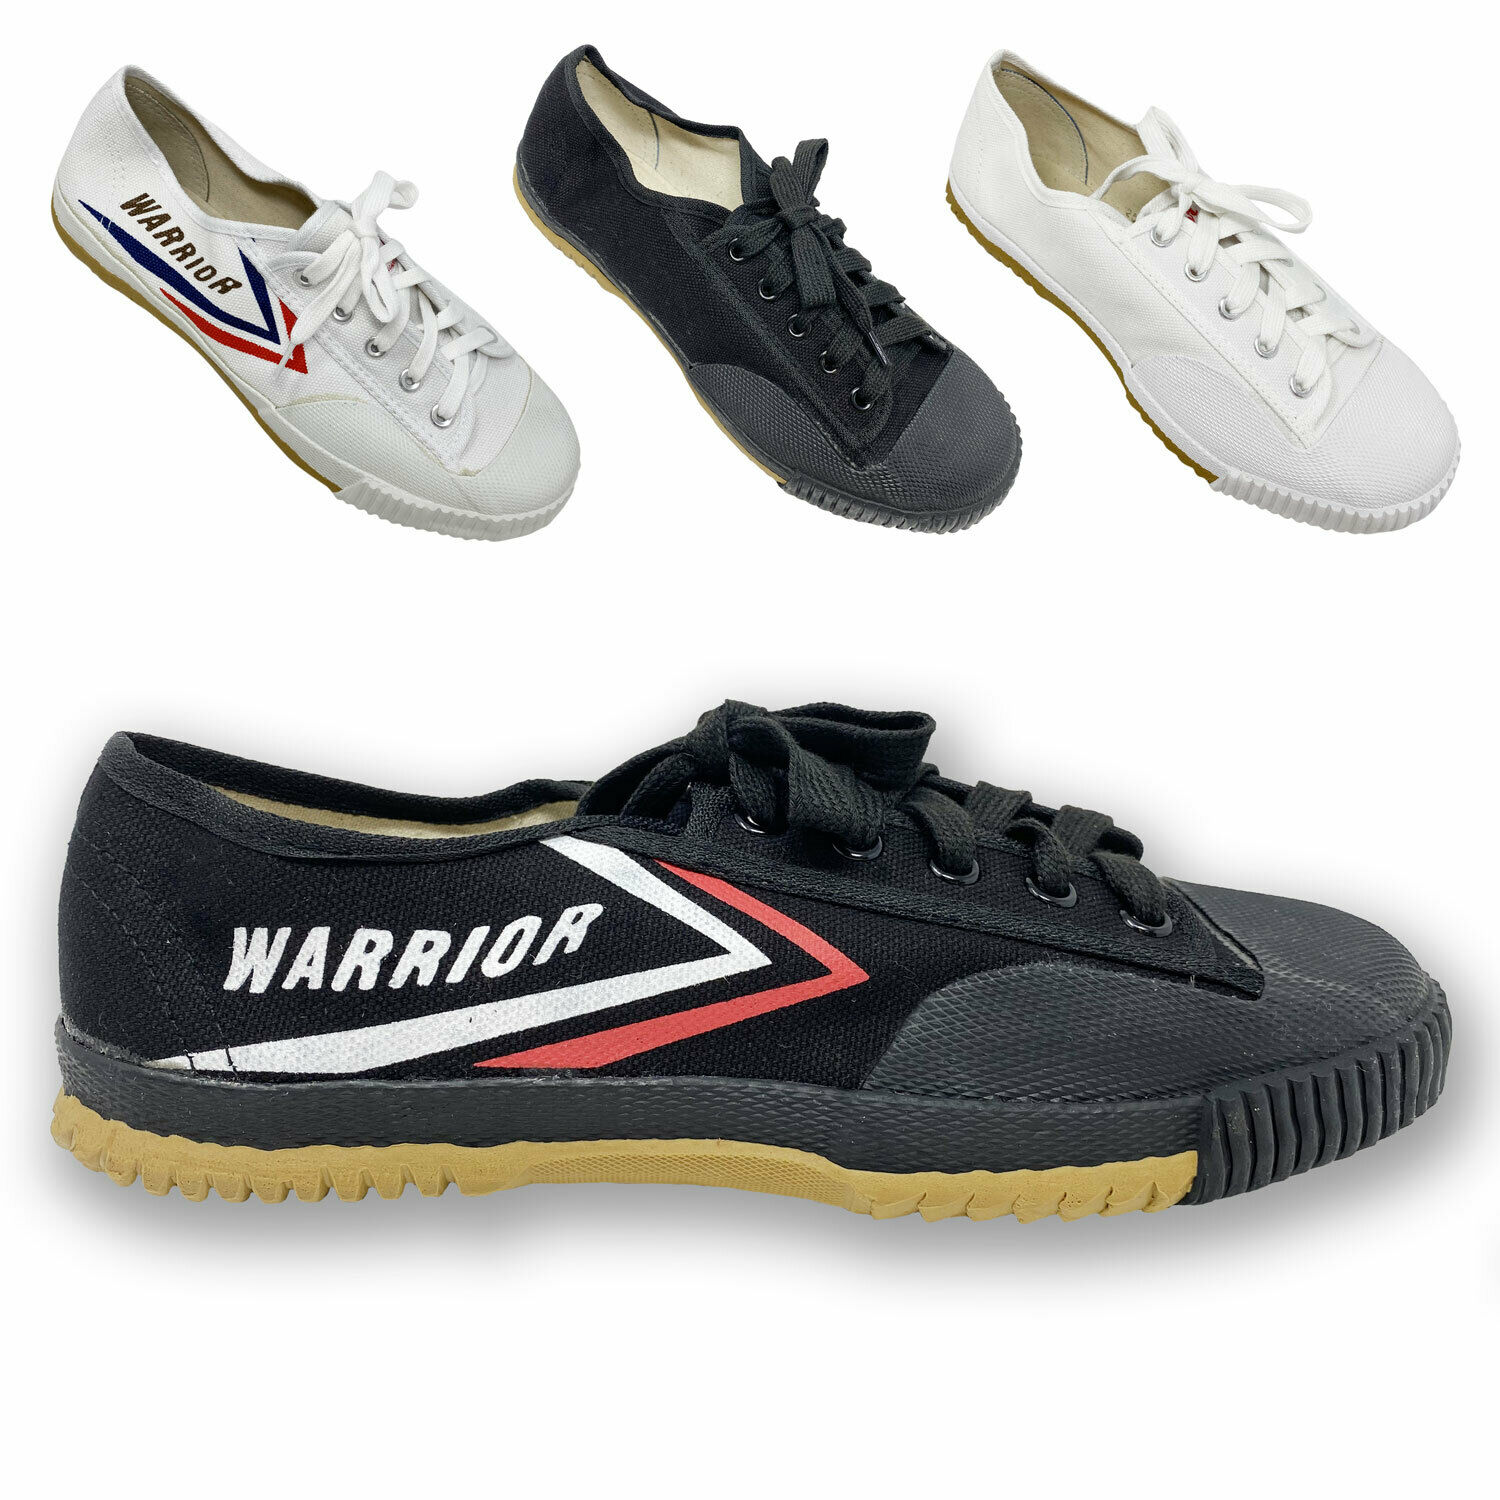 Warrior Martial Arts shoes for Kungfu Taichi Wushu Parkour all sports unisex